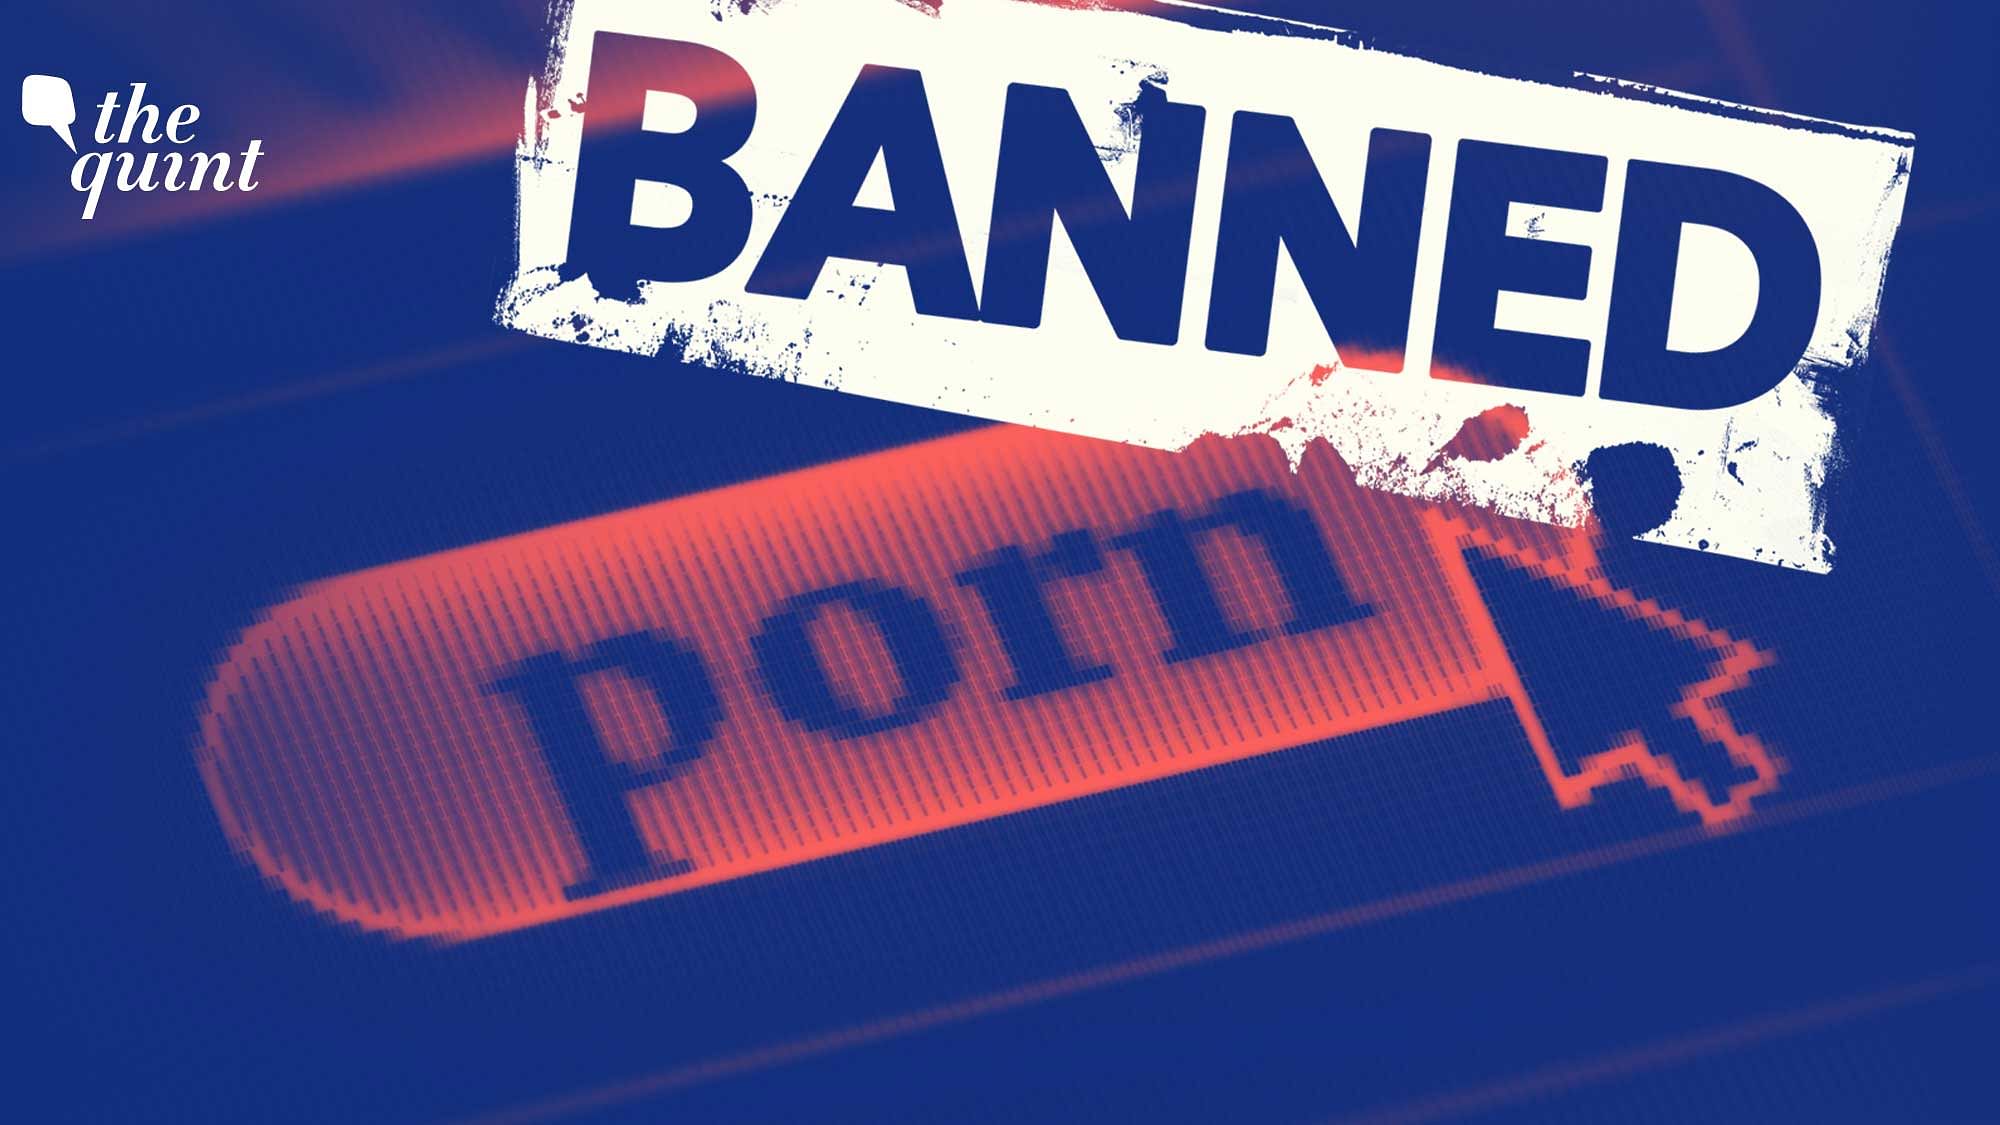 FAQ India Porn Ban Government Blocks 67 More Websites, Heres the Full List